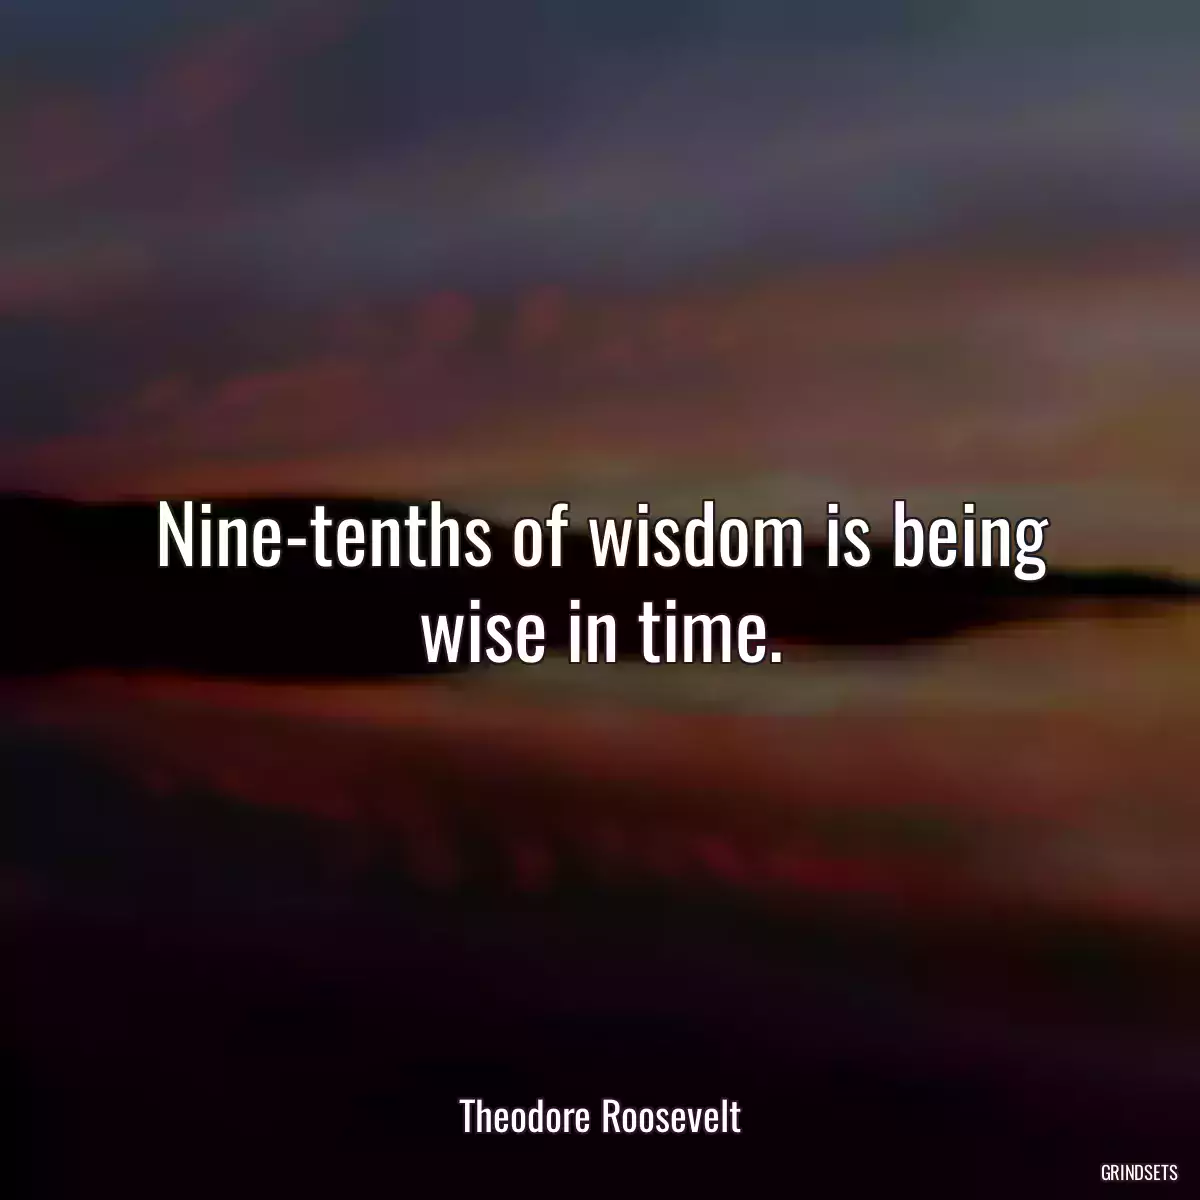 Nine-tenths of wisdom is being wise in time.